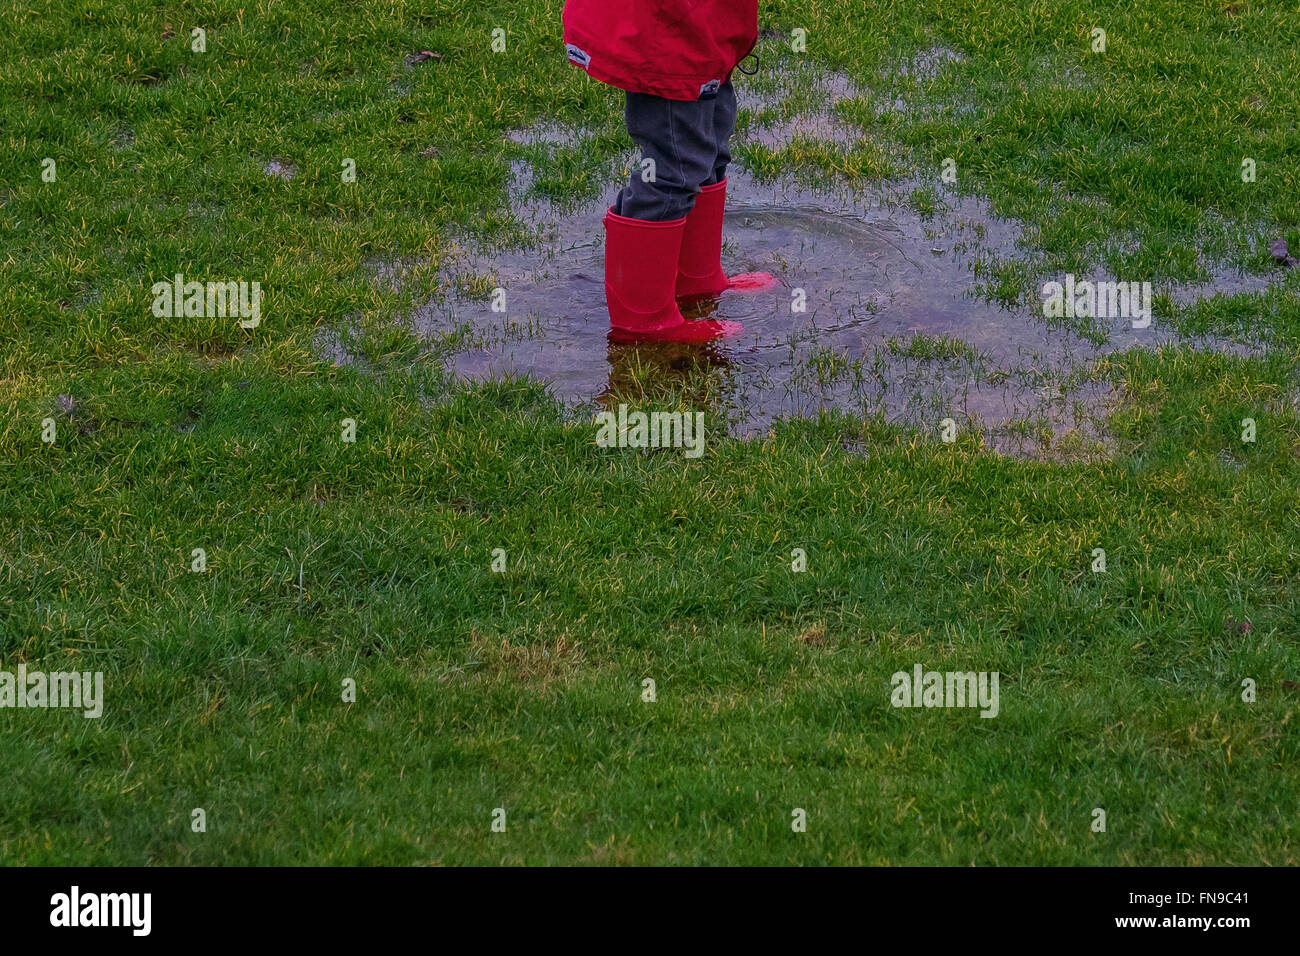 Low section of a boy standing in a puddle Stock Photo